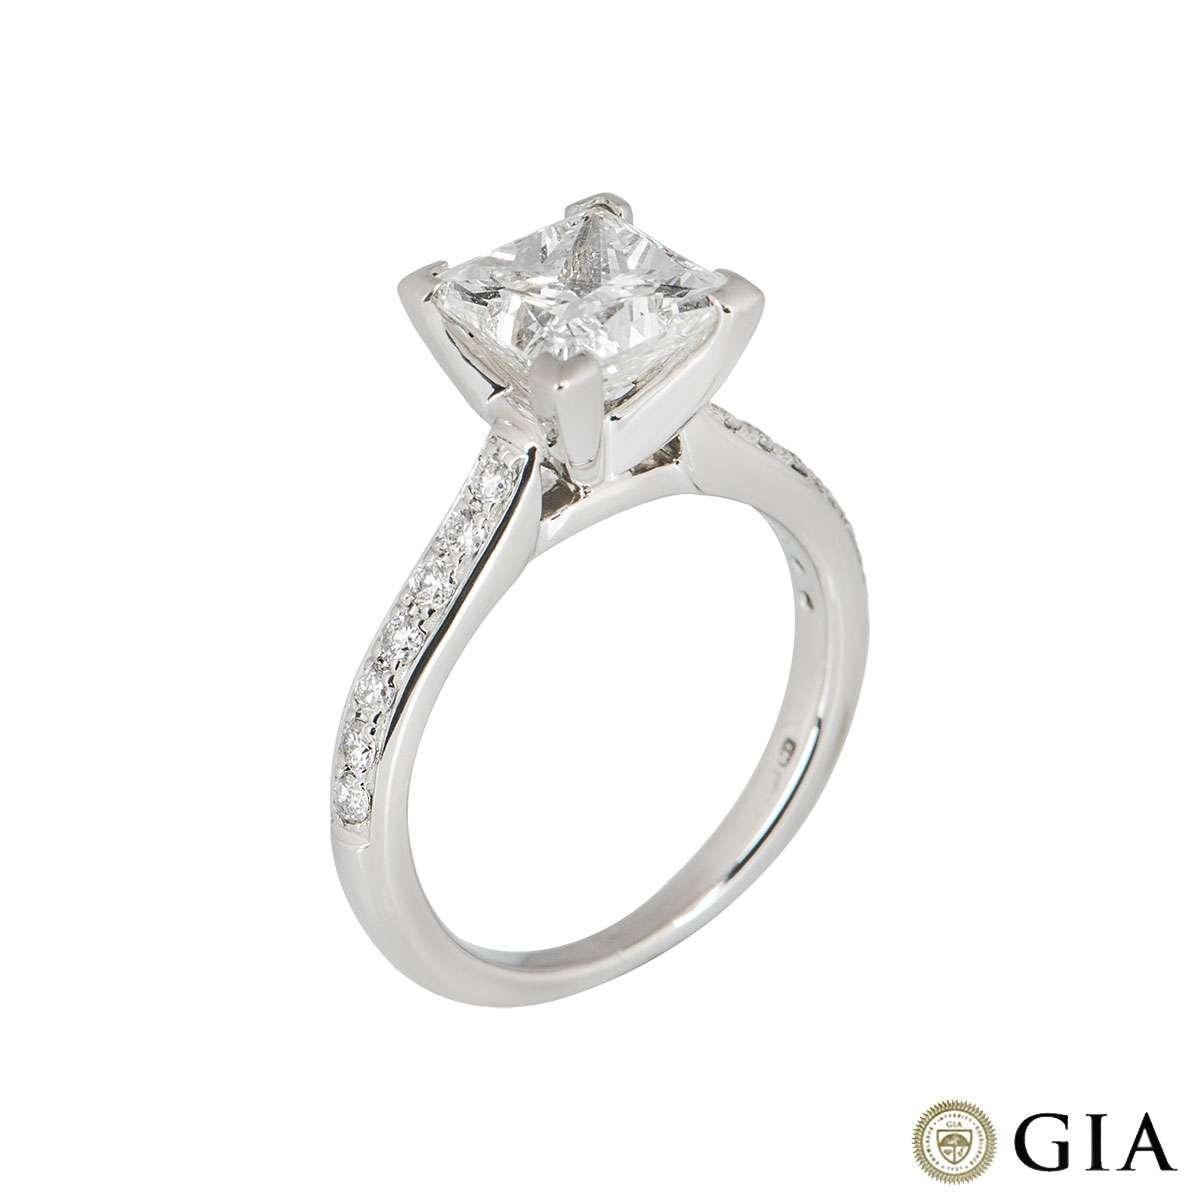 An elegant diamond ring in platinum. The ring is set to the centre with a claw set 2.02ct princess cut diamond, H colour and VS2 clarity, complete with GIA laser inscription. Accentuating the central diamond are pave set round brilliant cut diamond